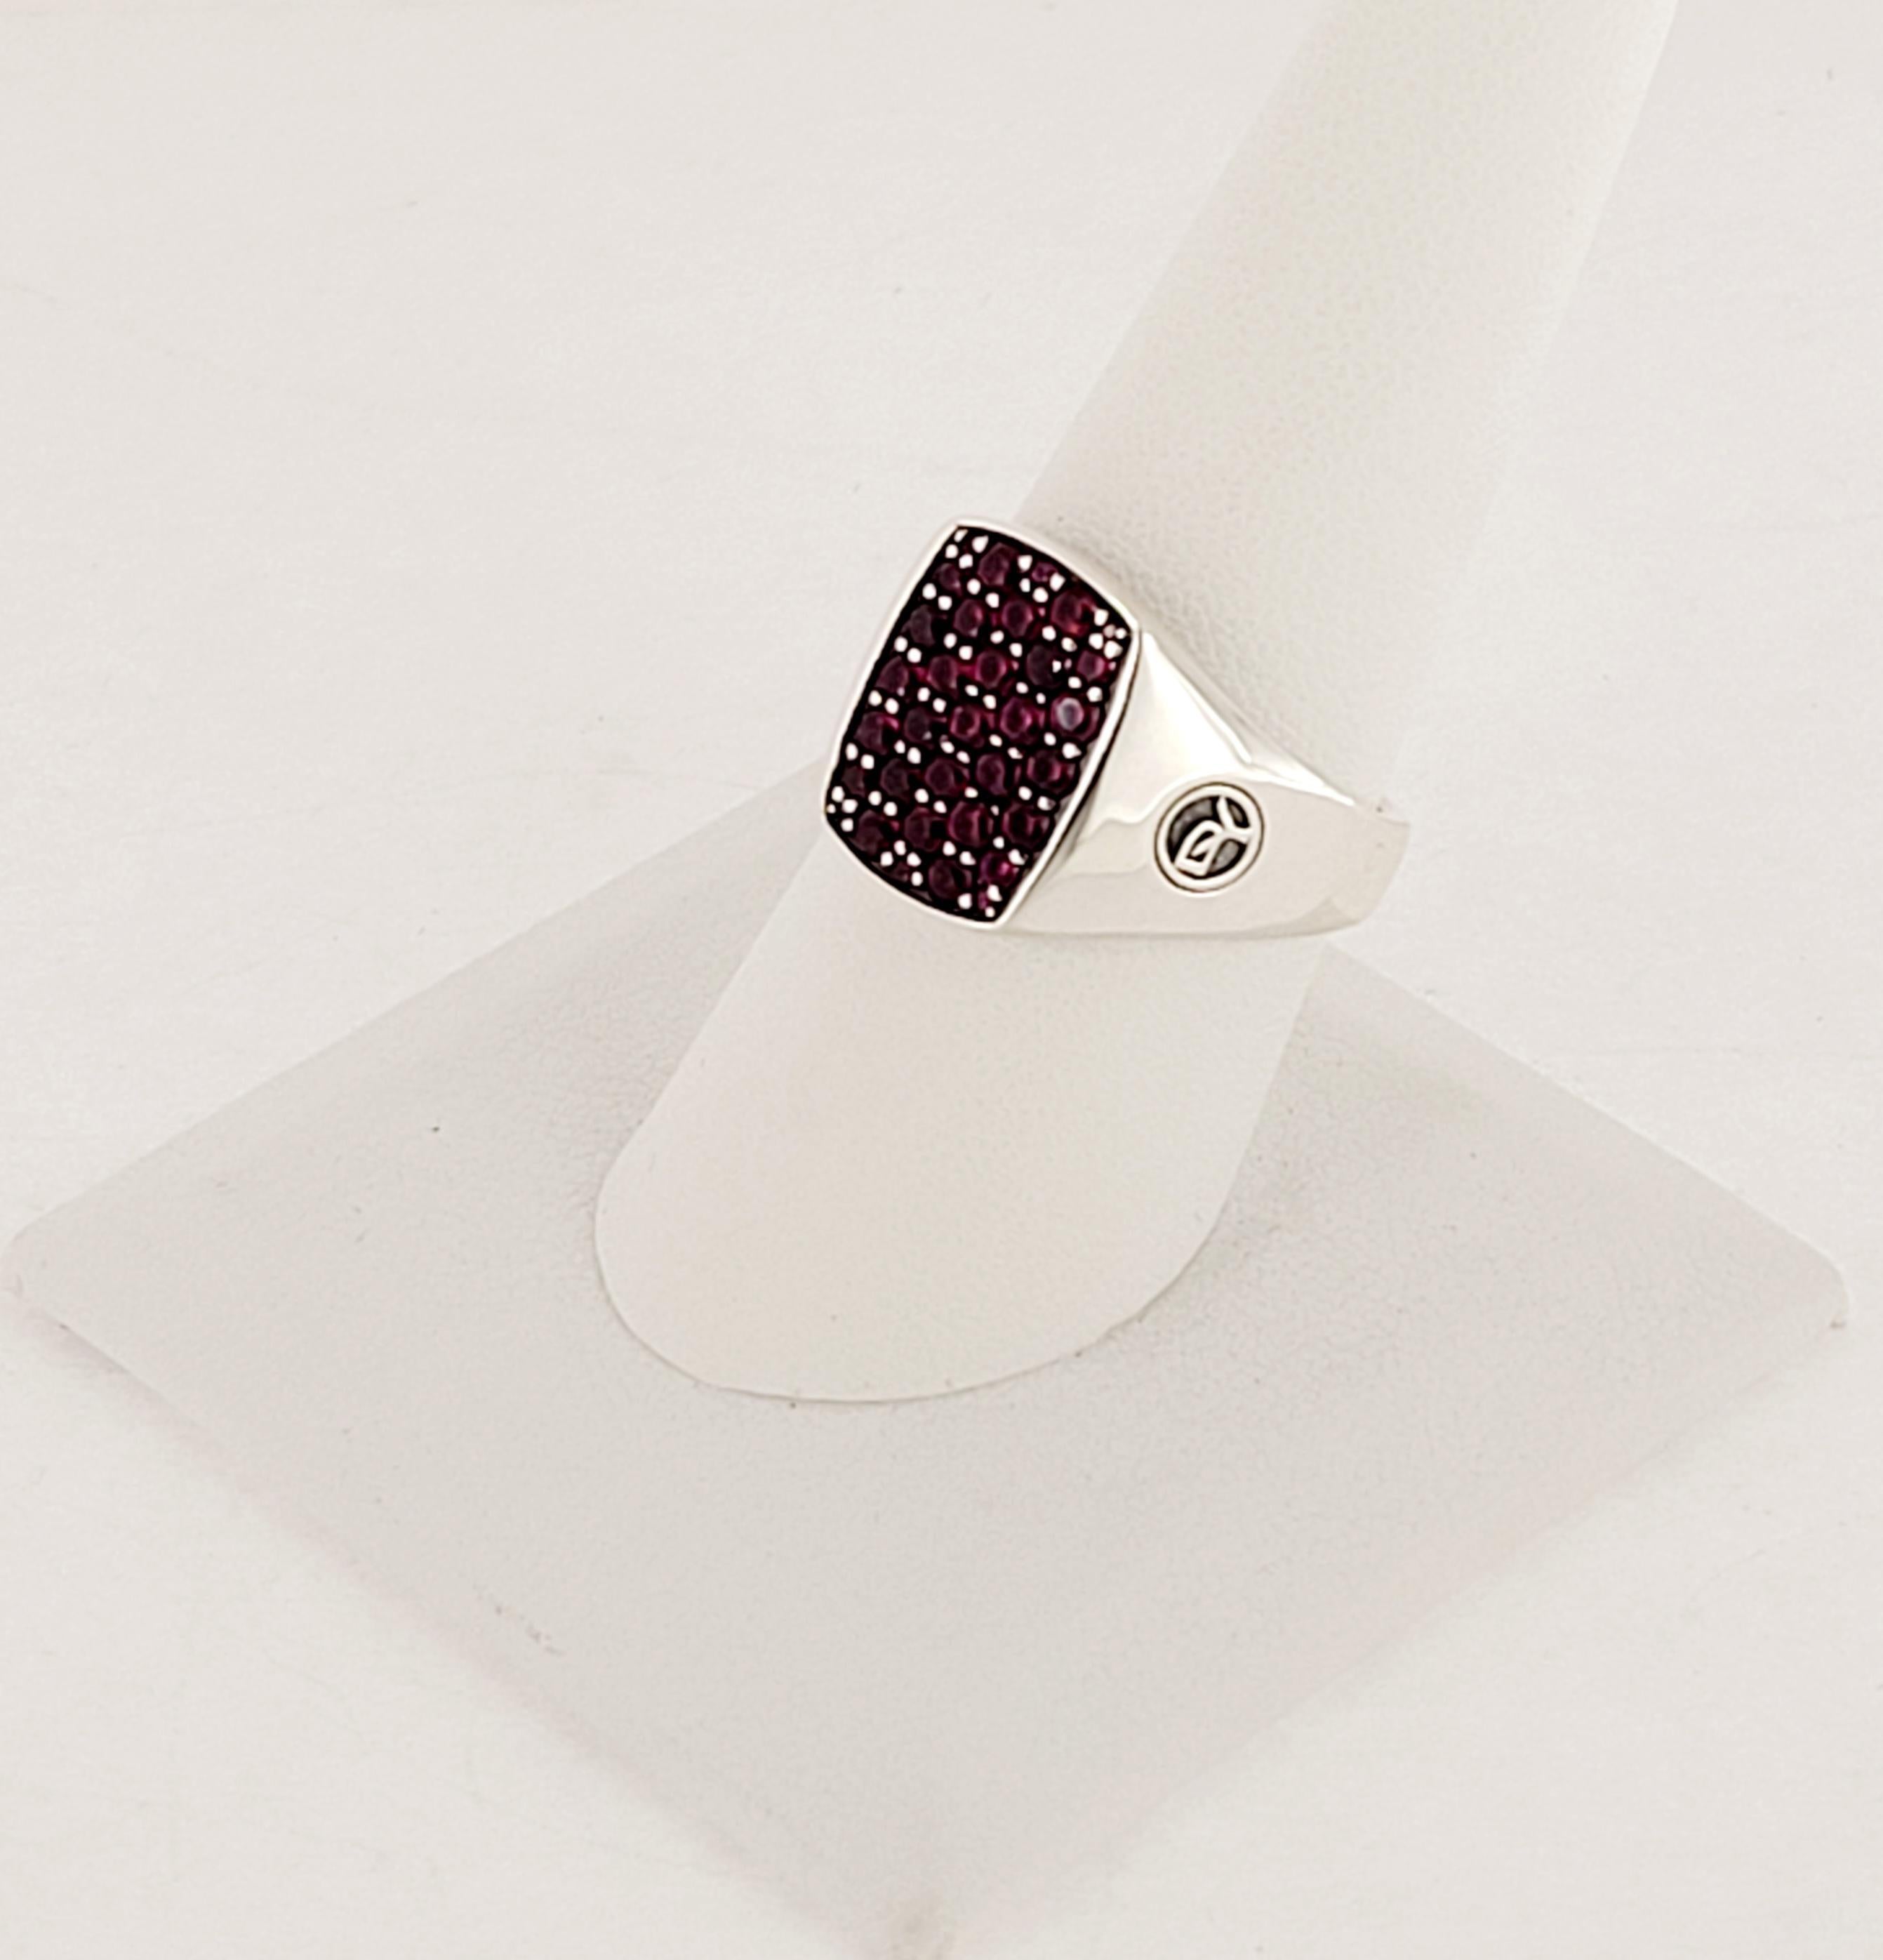 Brand David Yurman 
Brand new, never worn
Gender Men
Type Ring 
925 Sterling Silver
Ring Size 8
Main stone pink sapphires 
Stone Color Pink 
Weight 9.6gr
Comes with David Yurman pouch